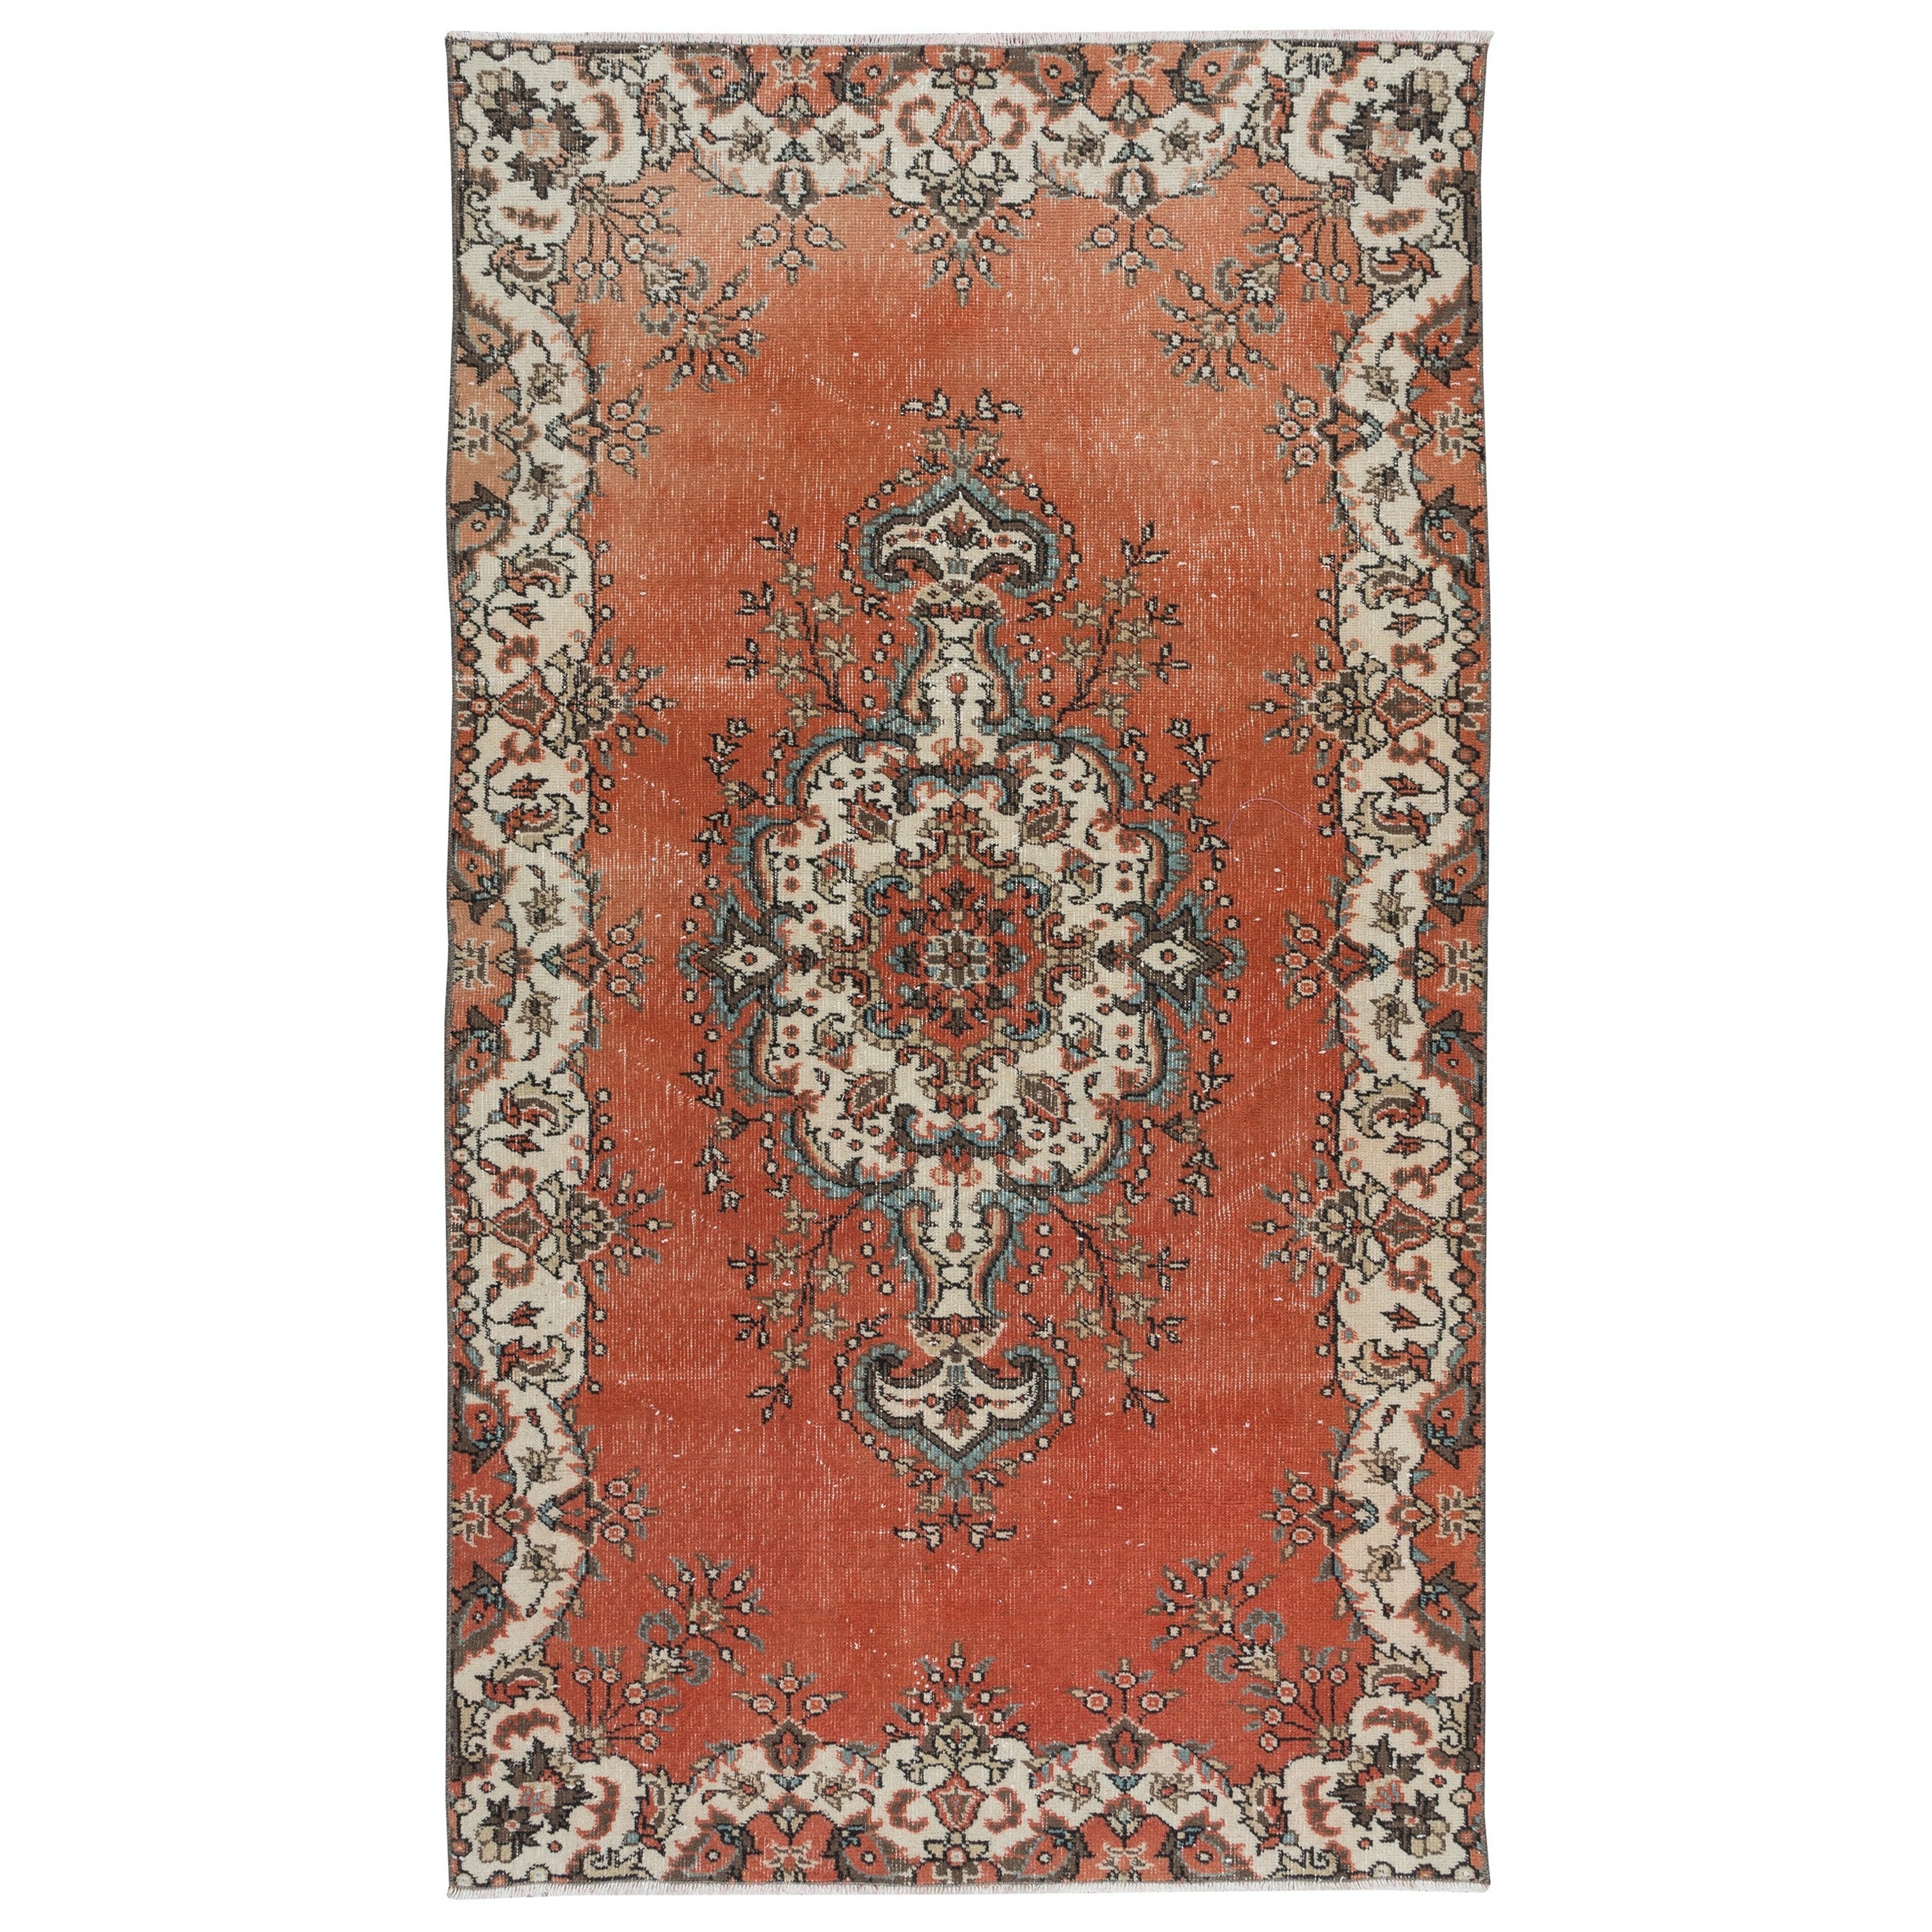 3.8x6.6 Ft Traditional Vintage Handmade Turkish Rug in Red, Beige with Medallion For Sale